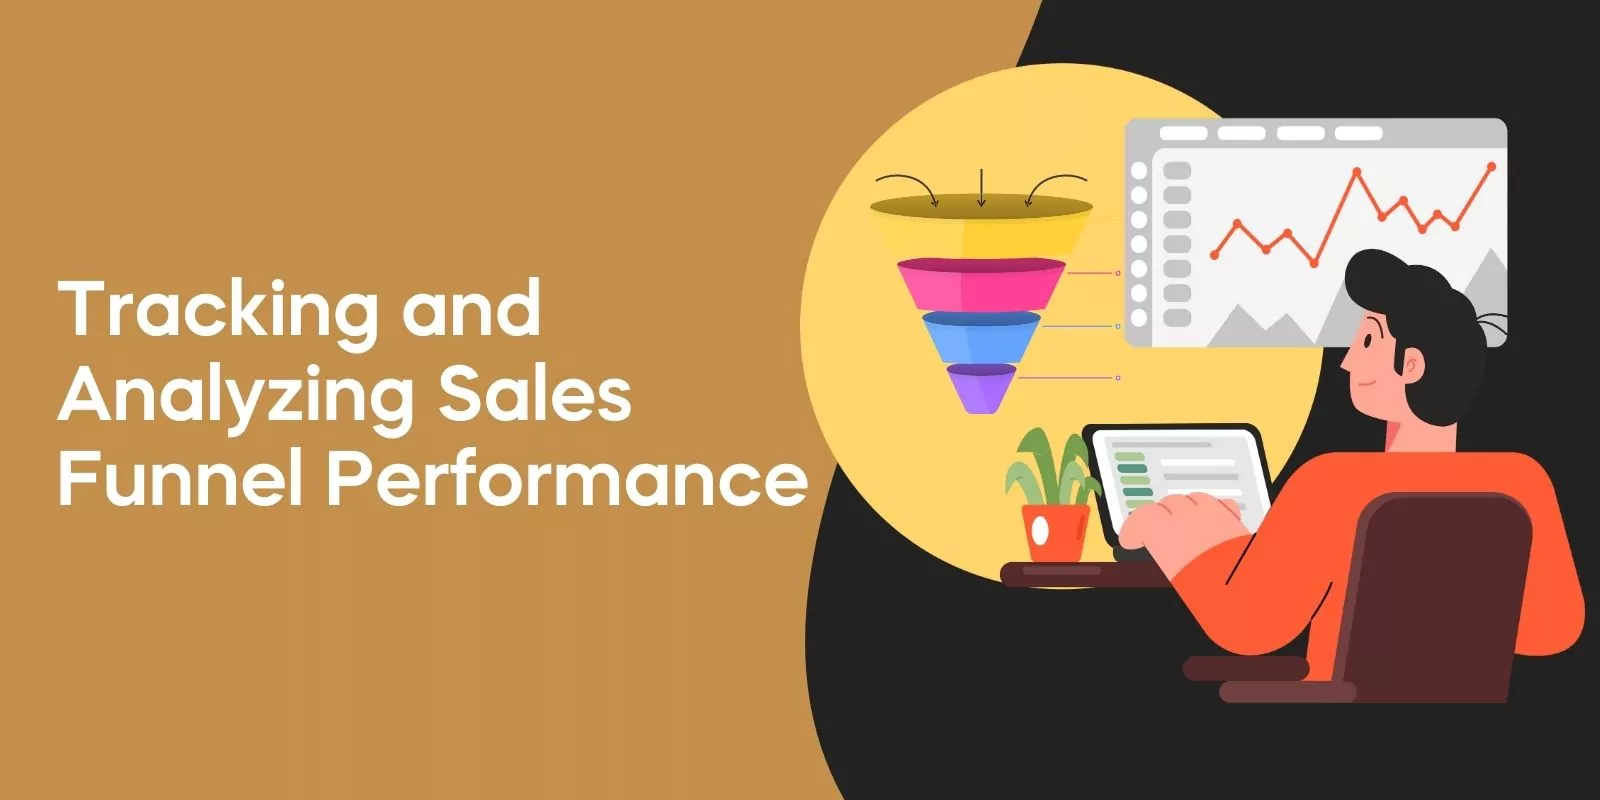 Tracking and Analyzing Sales Funnel Performance